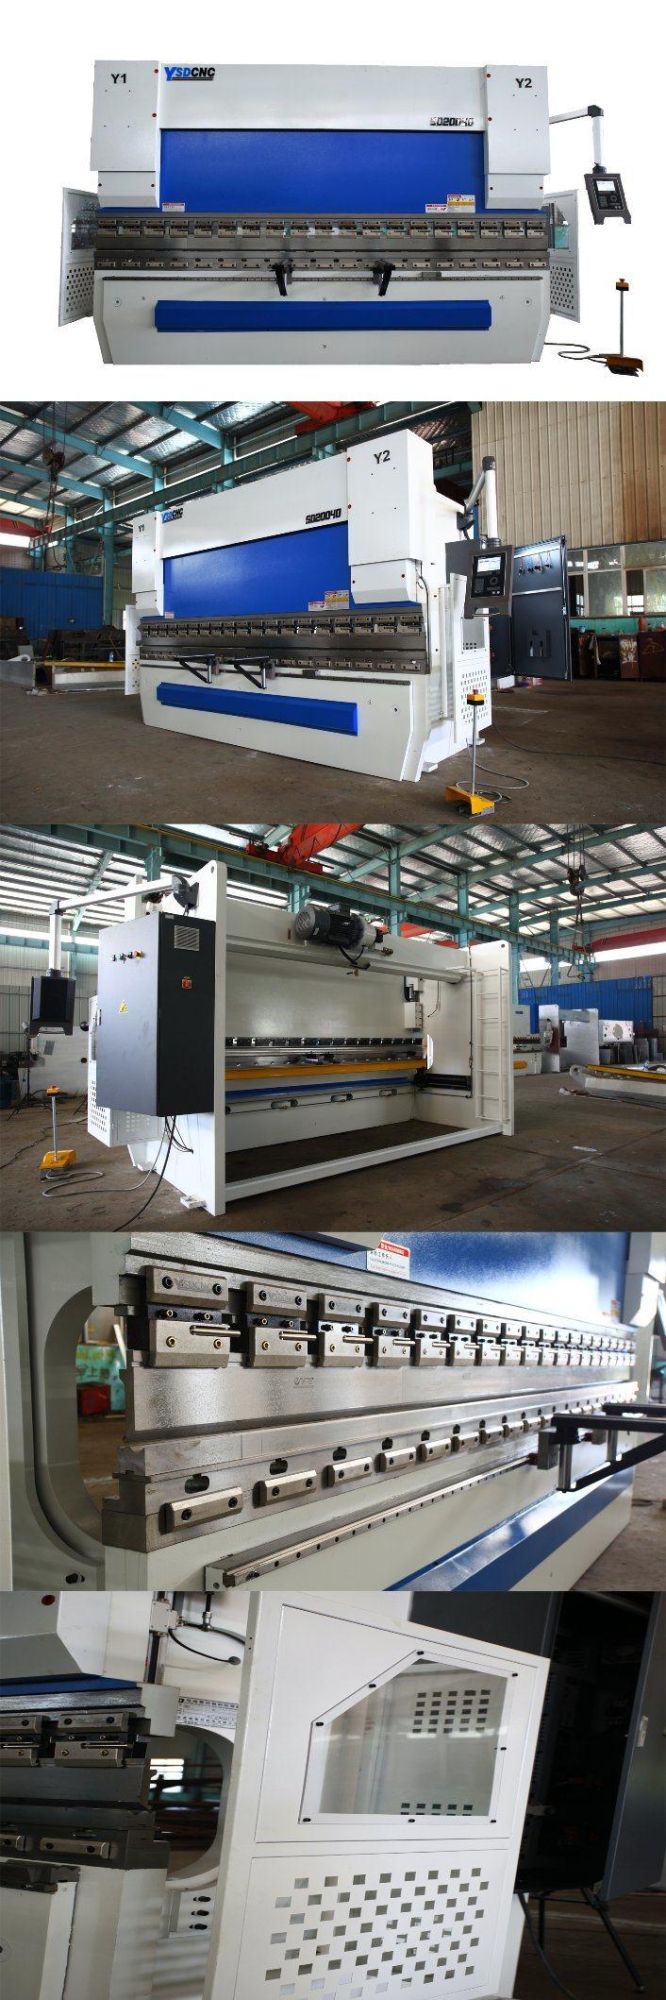 Hydraulic Plate Bending Machine with Da56s System 4+1 Axis